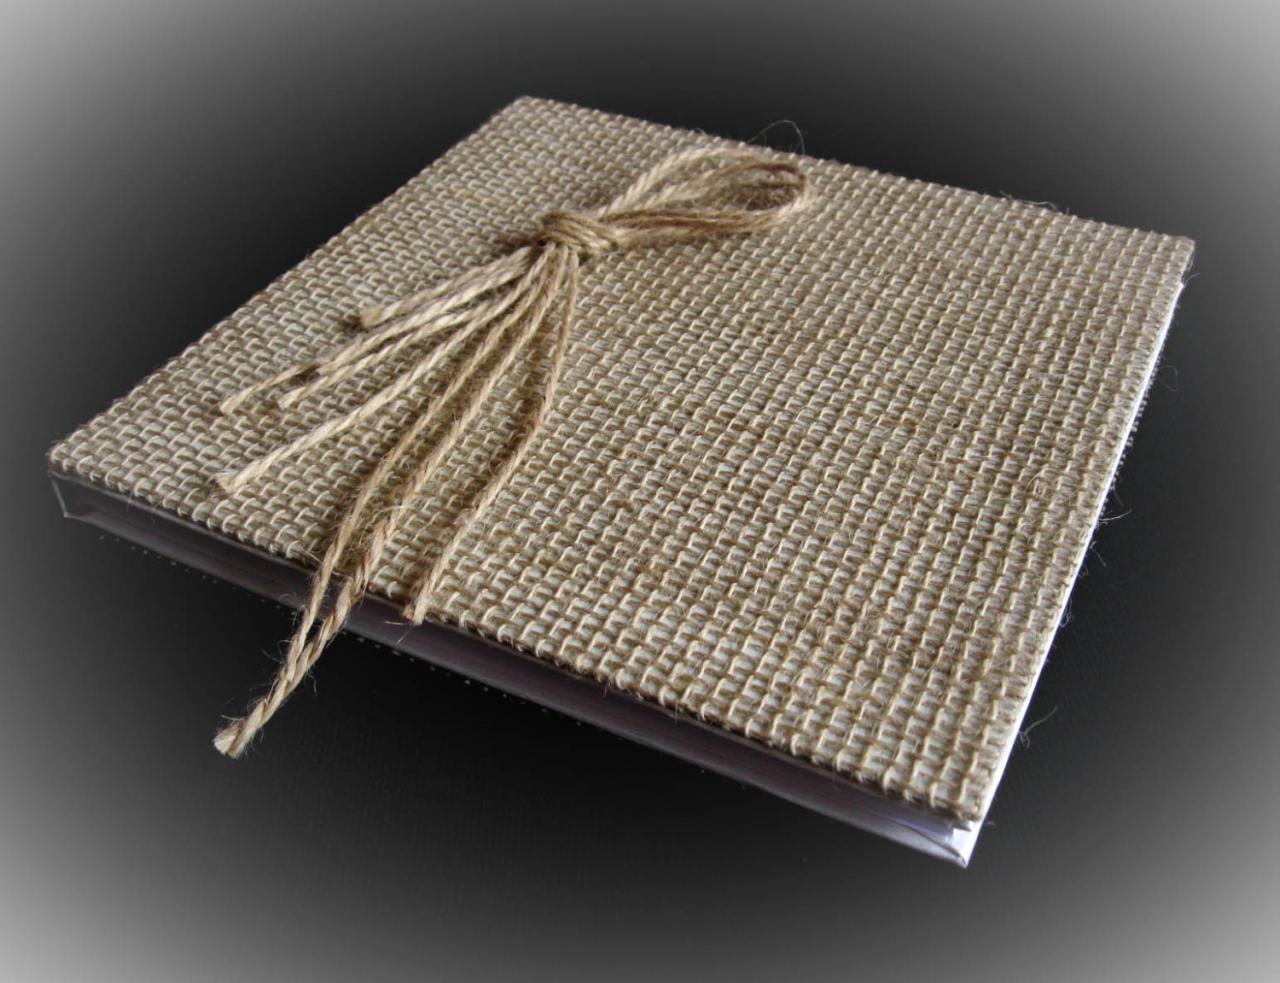 Rustic Wedding Guest Book Burlap And Flax, Personalized Guest Book, Unique Guest Book, Wedding Guestbook, Wedding Sign In Book, Fall Wedding